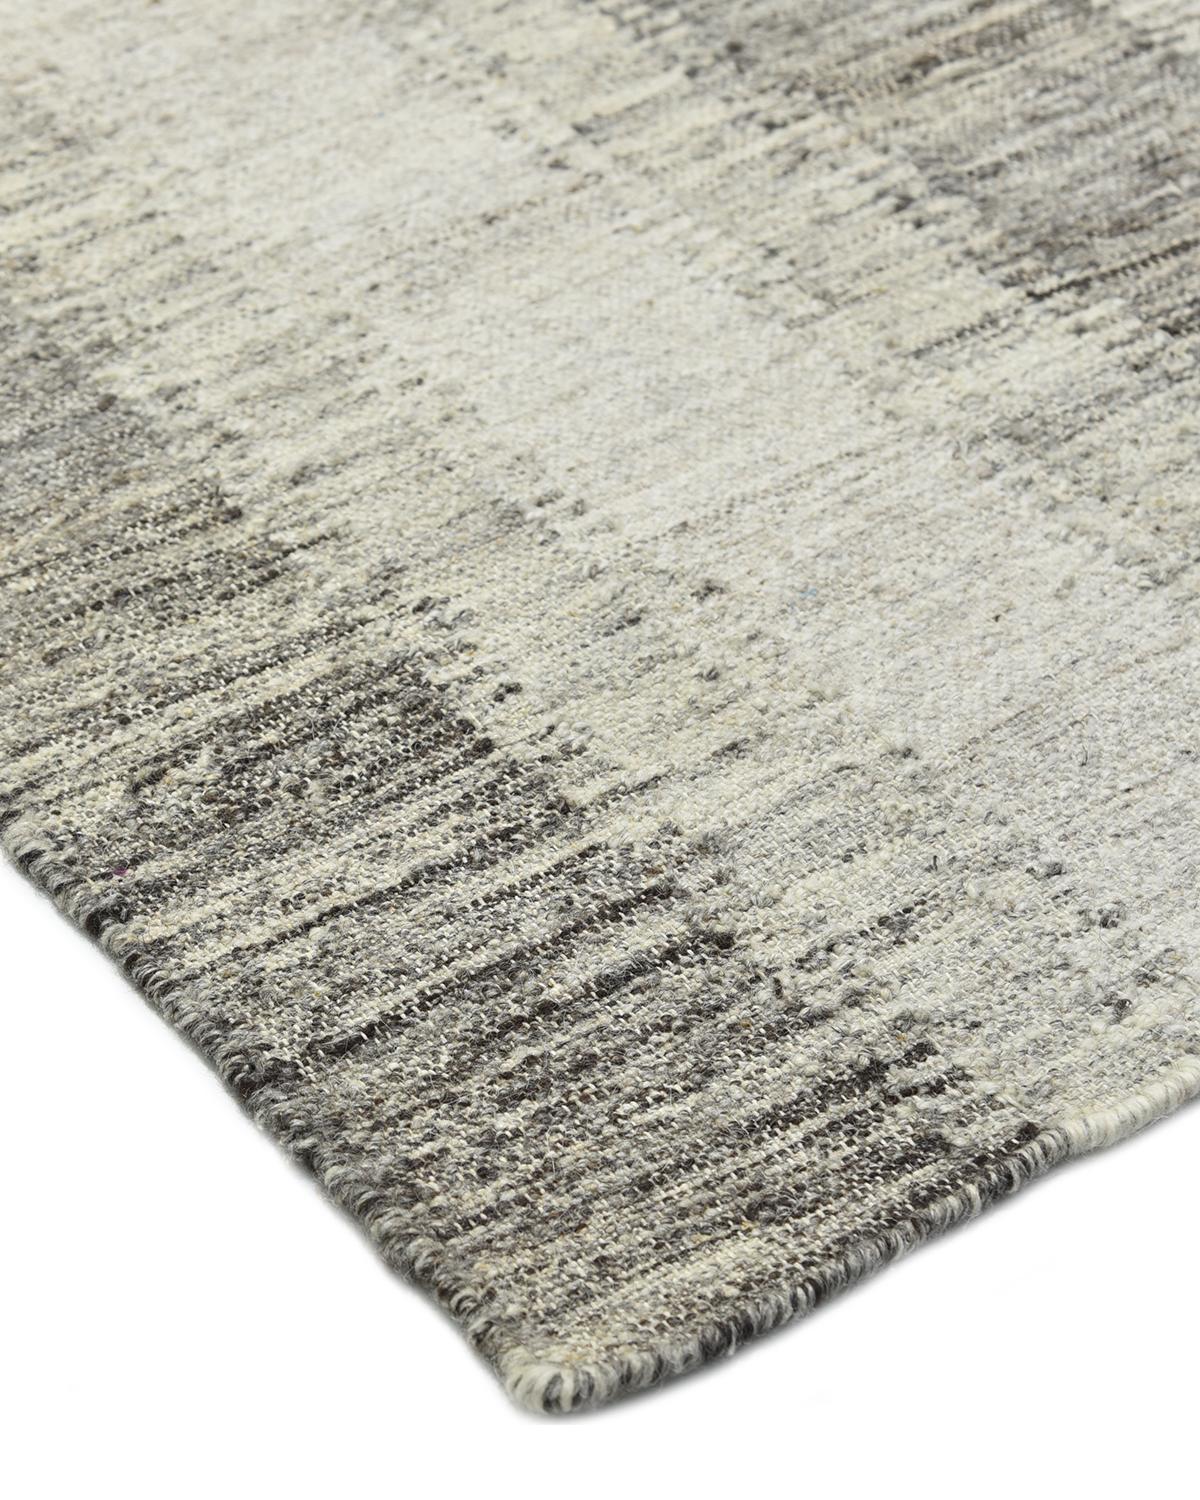 Durable and low-maintenance, flatweave rugs are especially popular for high-traffic rooms. The Flatweave collection is beautiful as well as practical. The quiet patterns and understated colors make them suited for a traditional living rooms as well